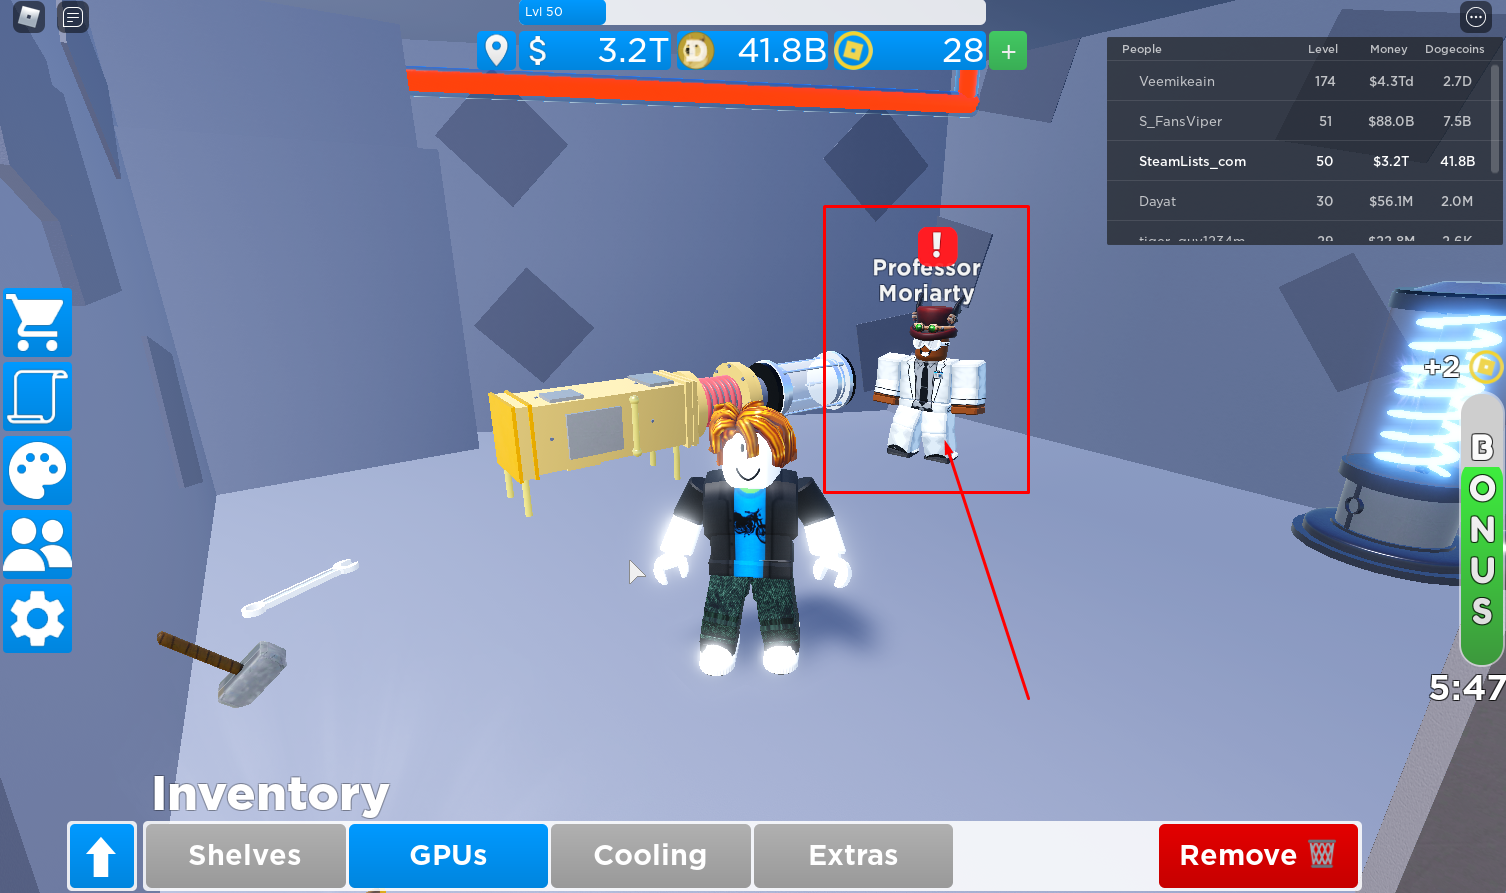 Roblox – Dogecoin Mining Tycoon where is Professor Moriarty? 3 - steamlists.com